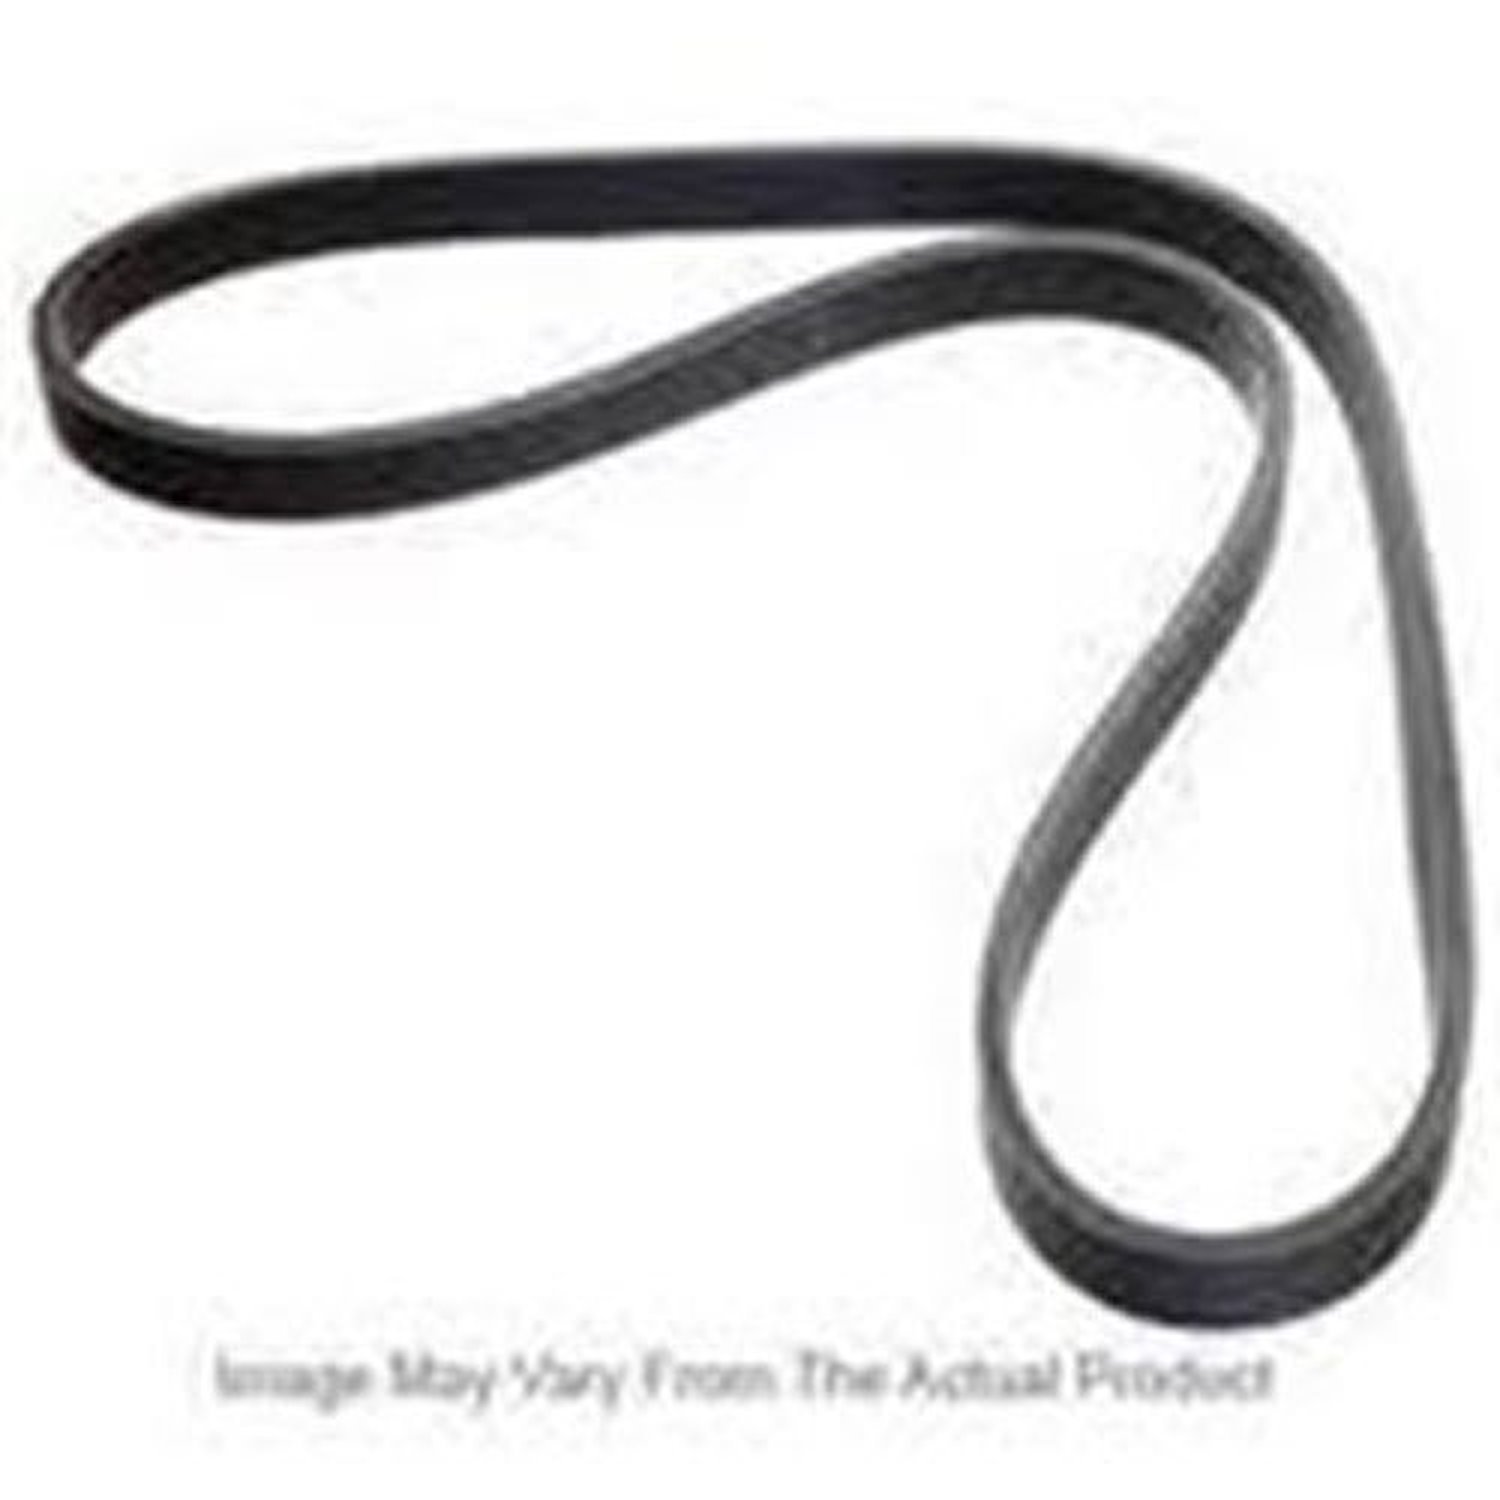 Serpentine Belt from Dayco 6-rib 0.17 in. thick 0.82 in. top width 88.78 inch effective length W rib profile.